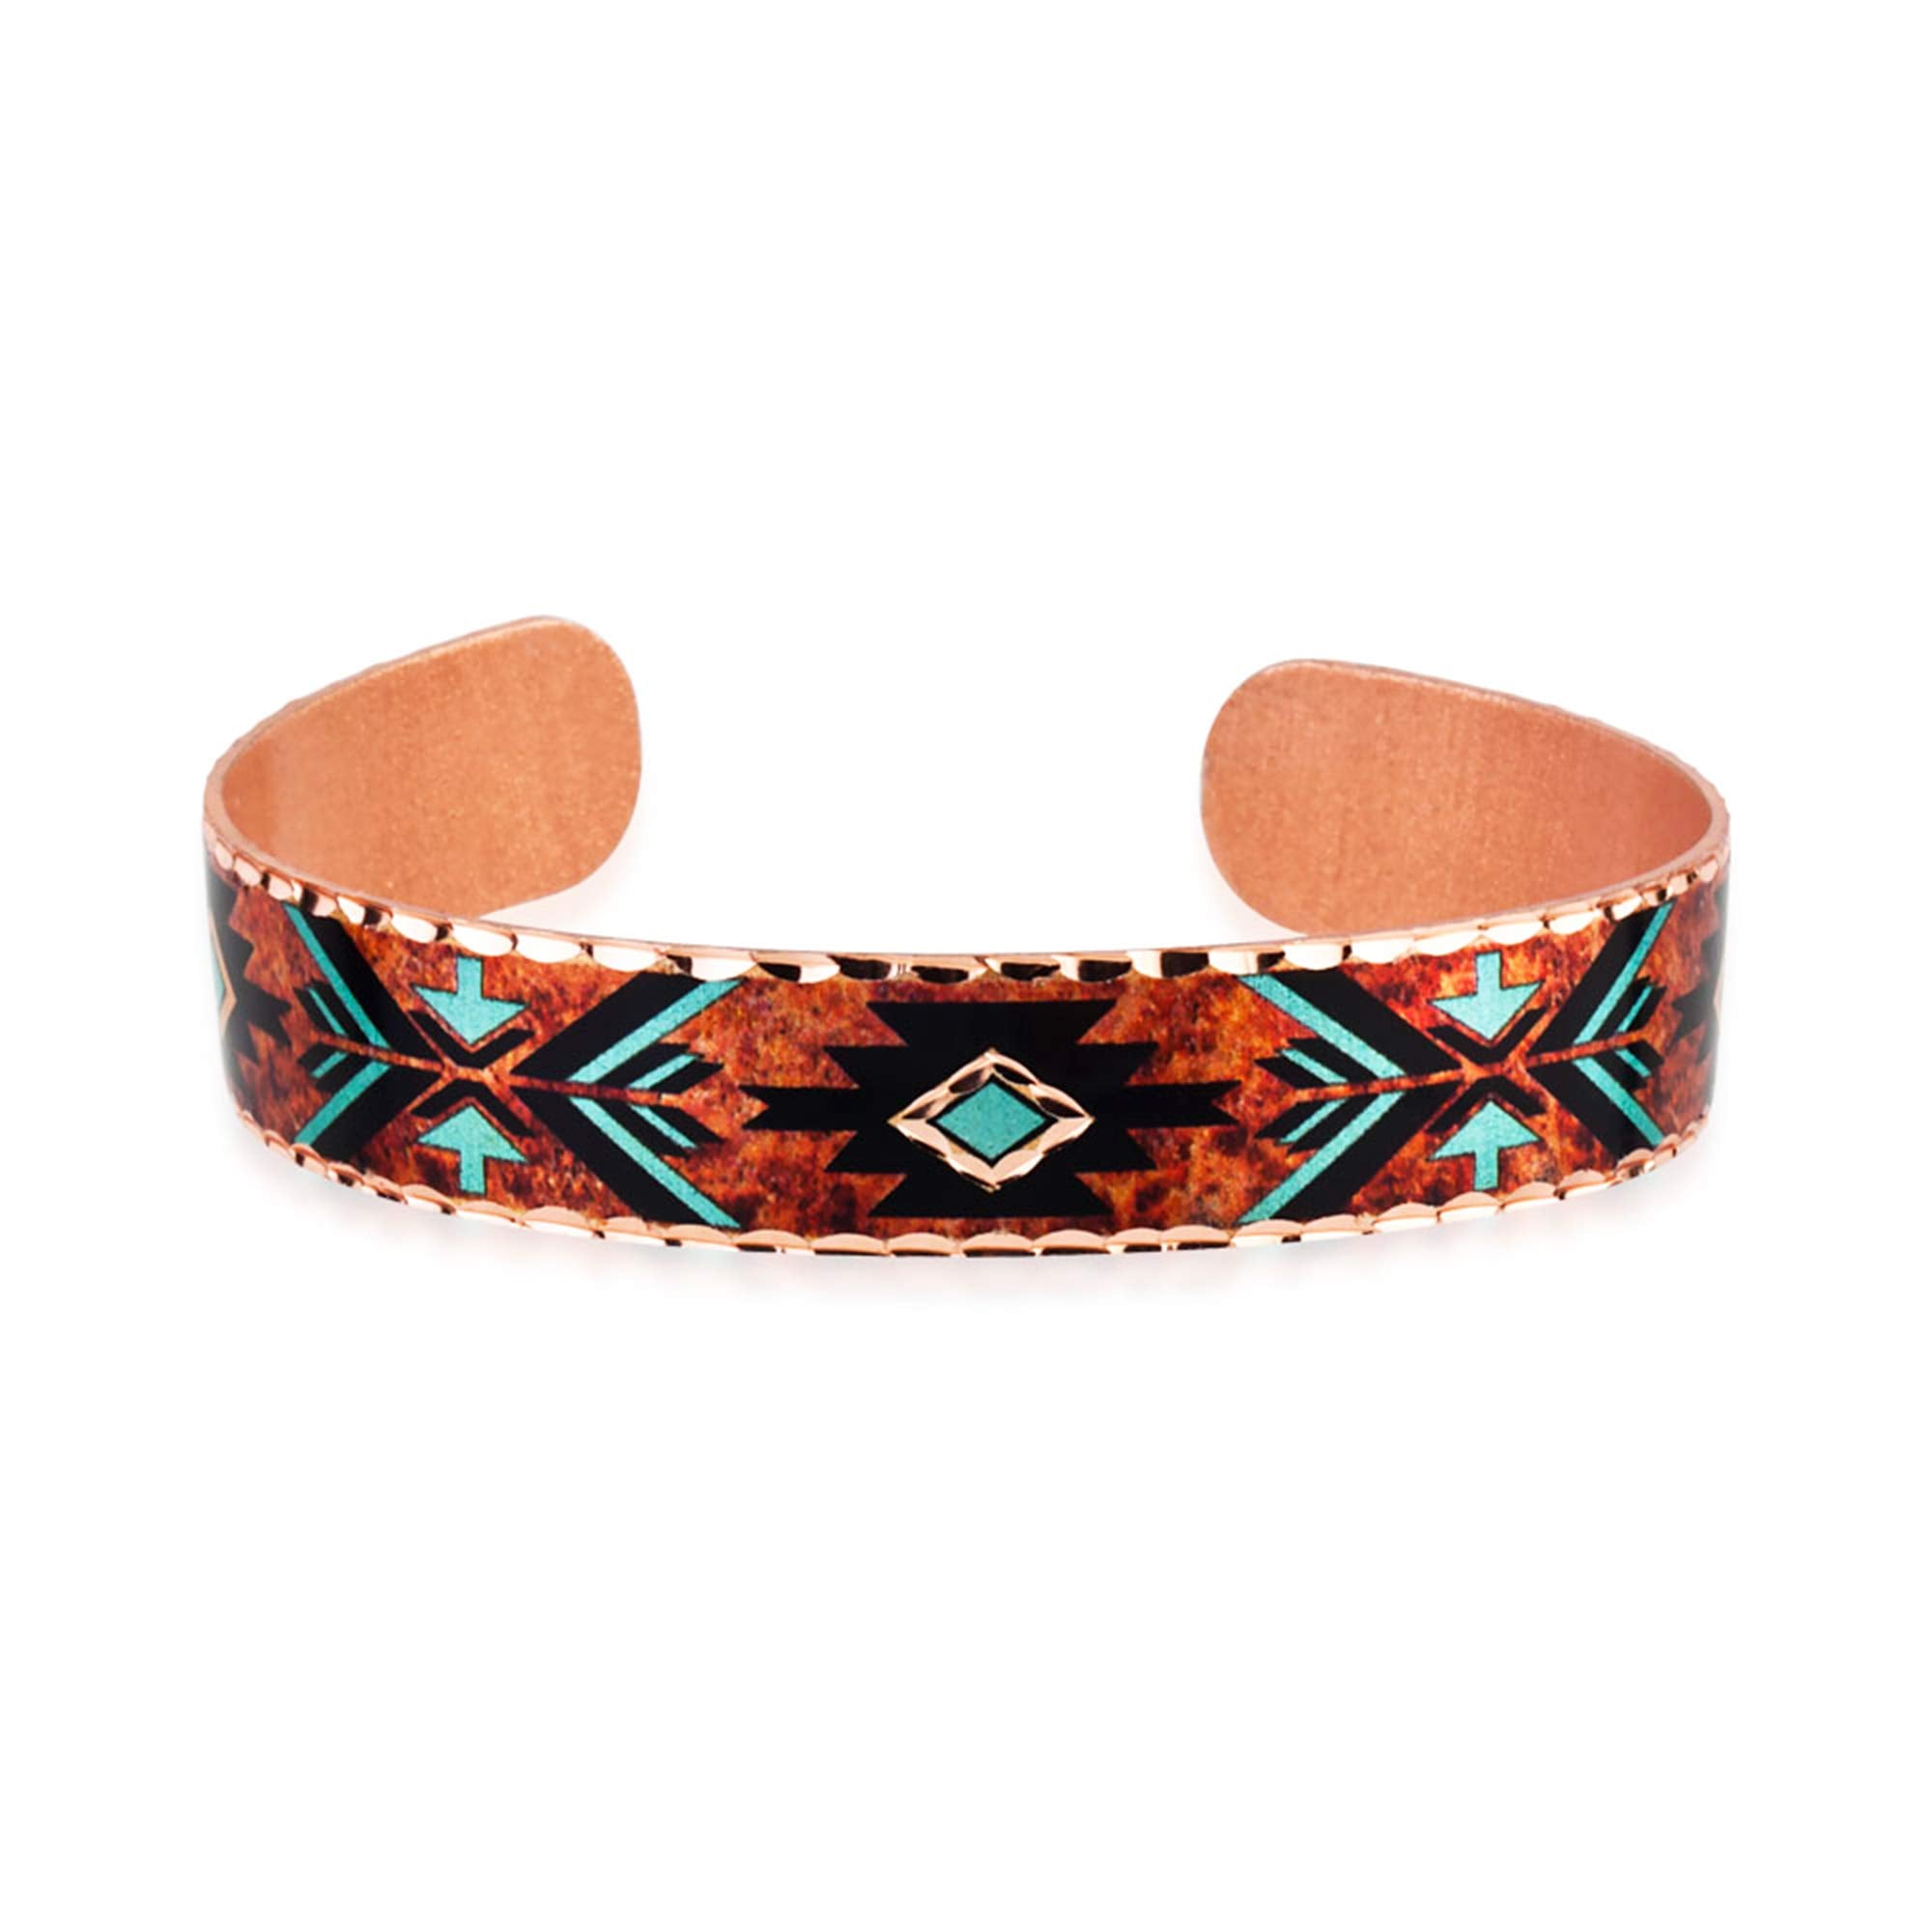 Maroon & Turquoise Copper Cuff Native American Bracelets, Artisan Handcrafted & Flame Painted Jewelry Arrowhead Bracelets, Vintage Style Solid Copper Cuff Bracelets, Makes Great Valentine's Day Gifts